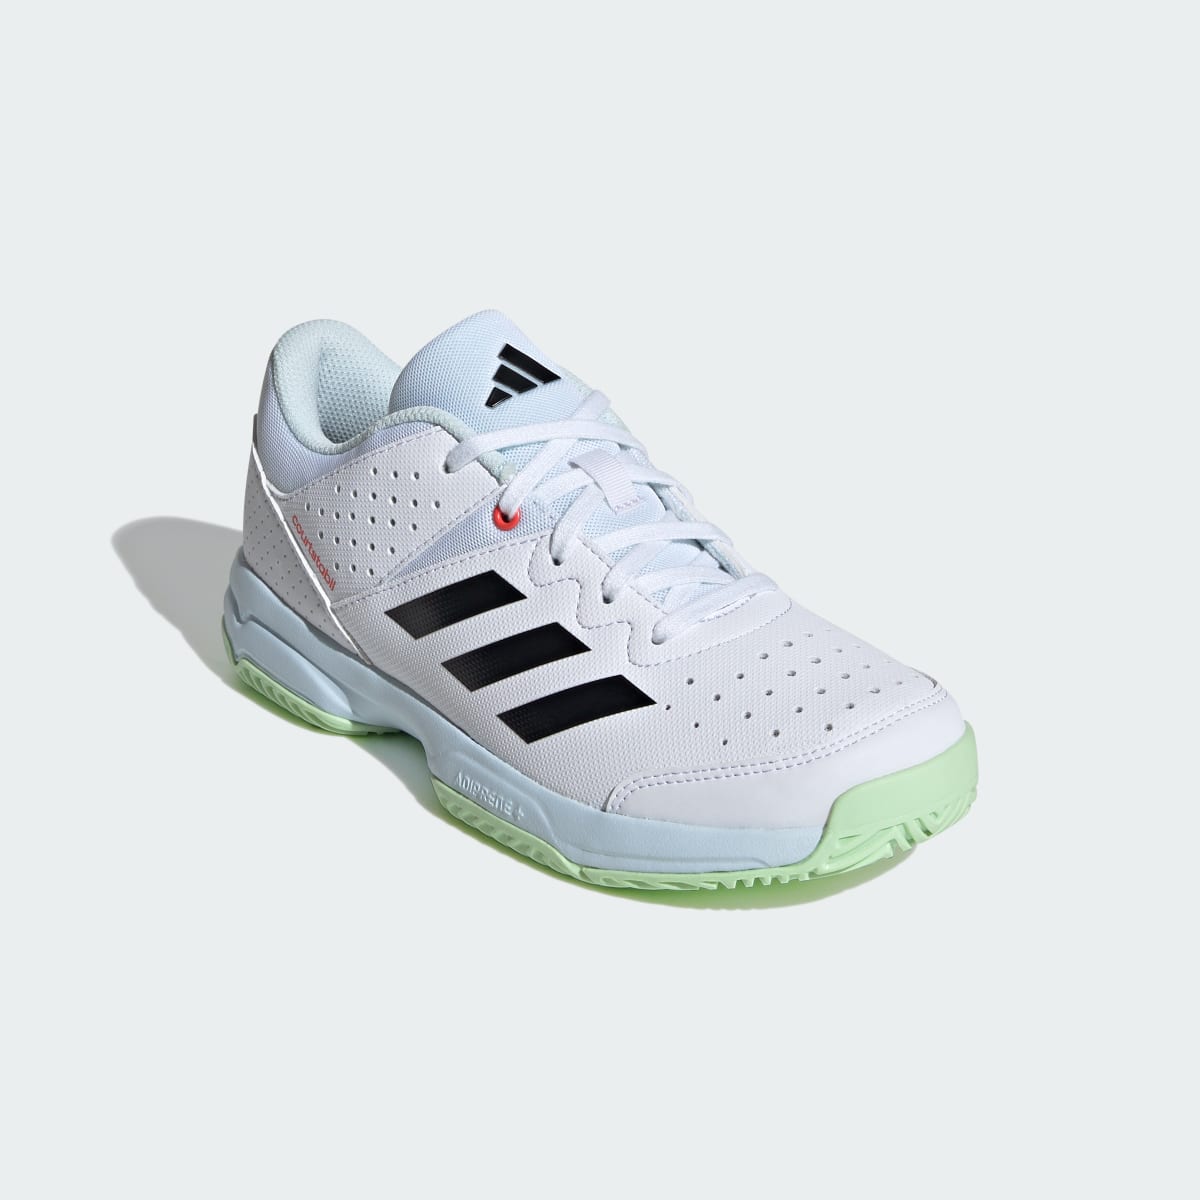 Adidas Court Stabil Shoes. 4